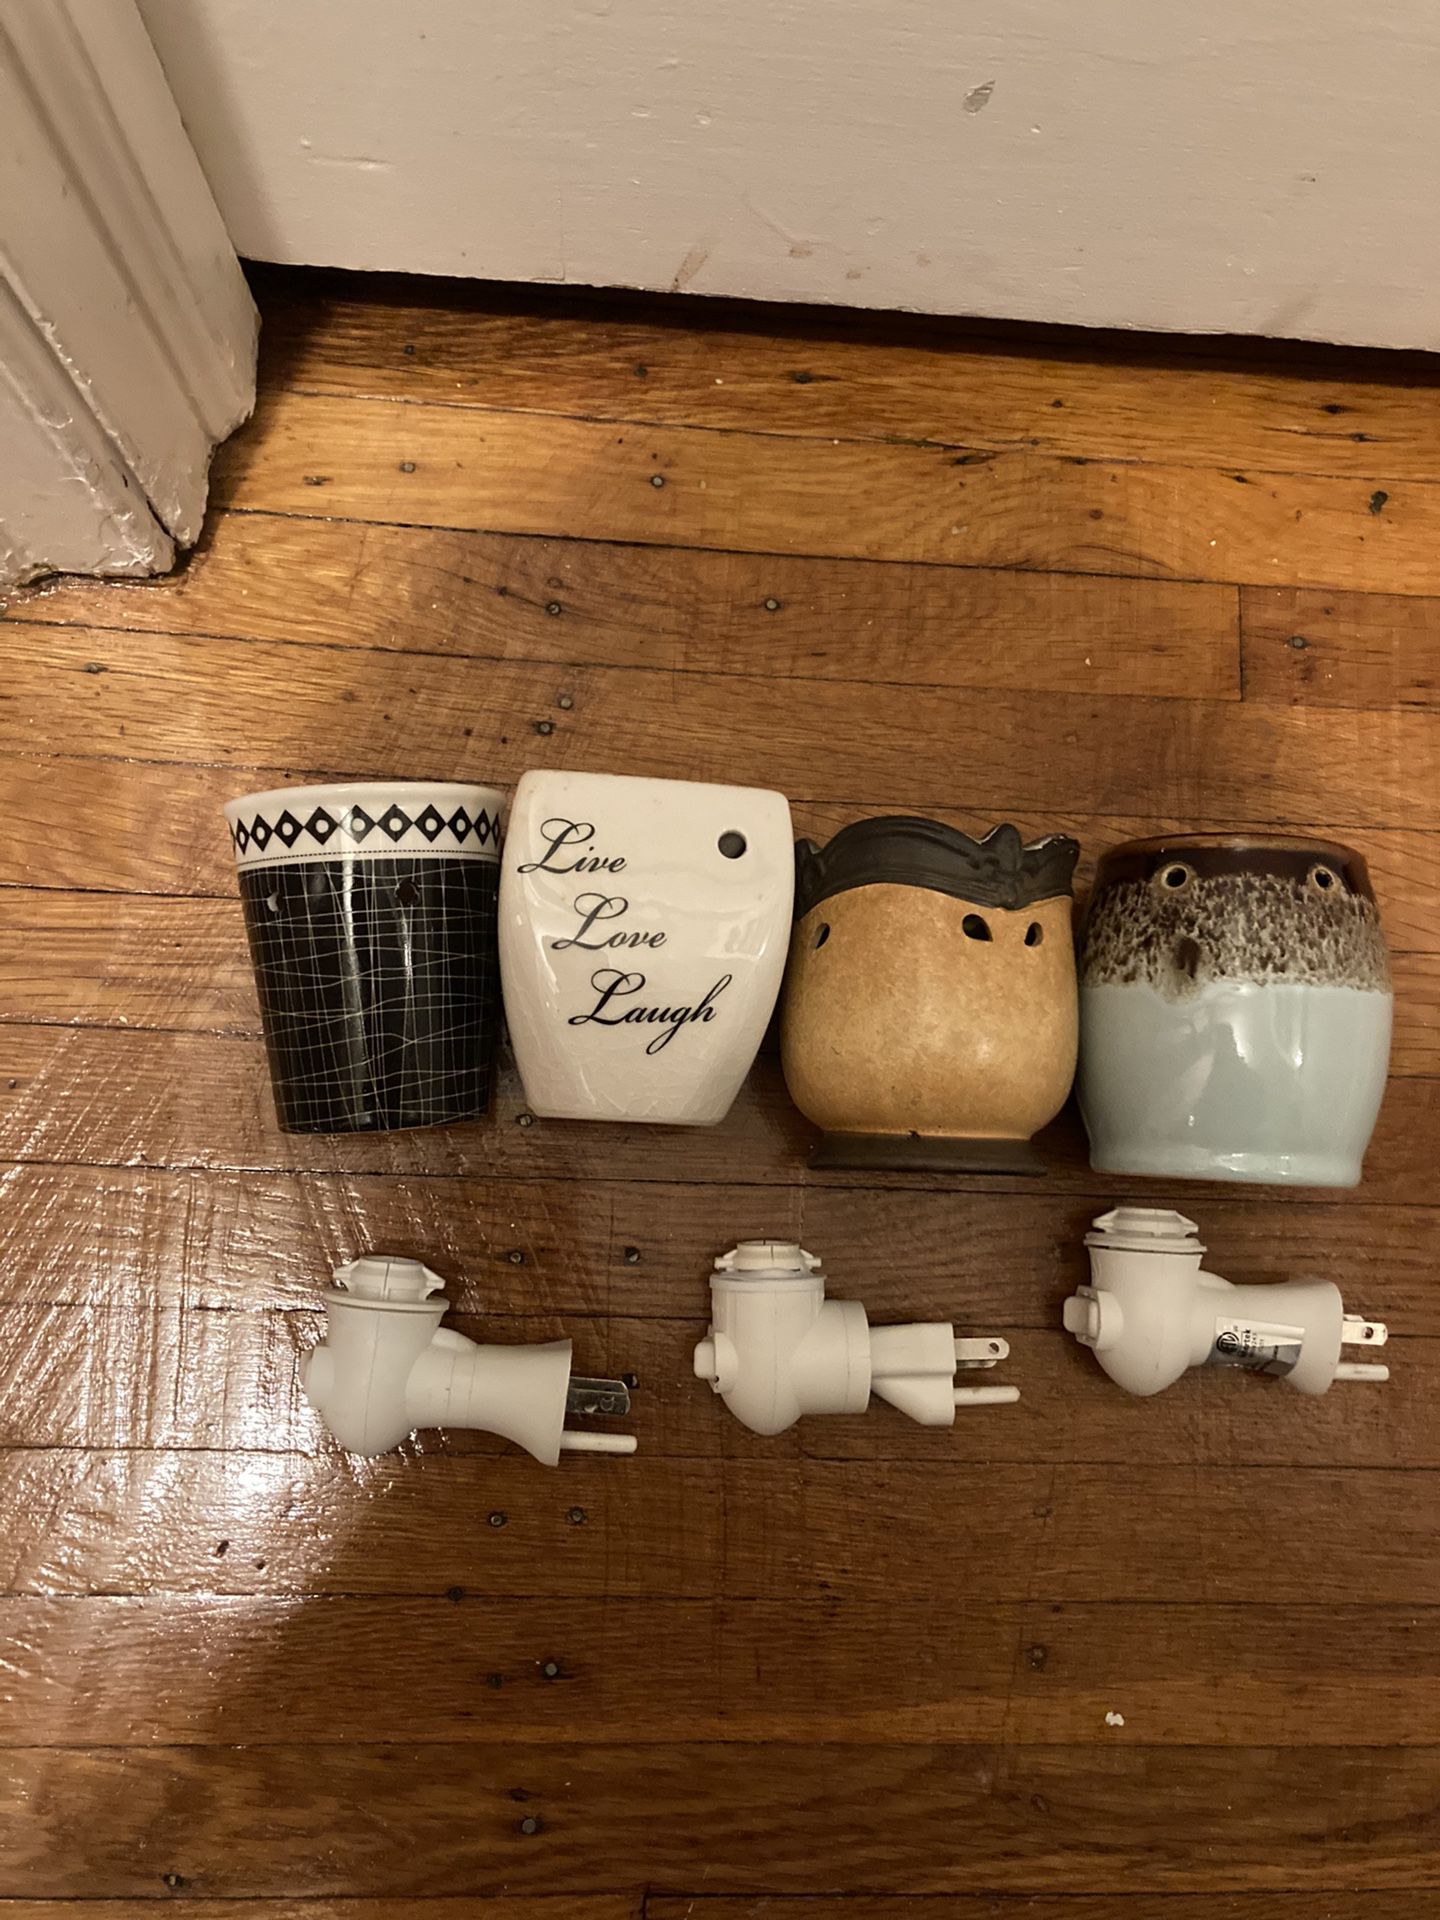 Four interchangeable Scentsy plug in wax warmers with three plugs